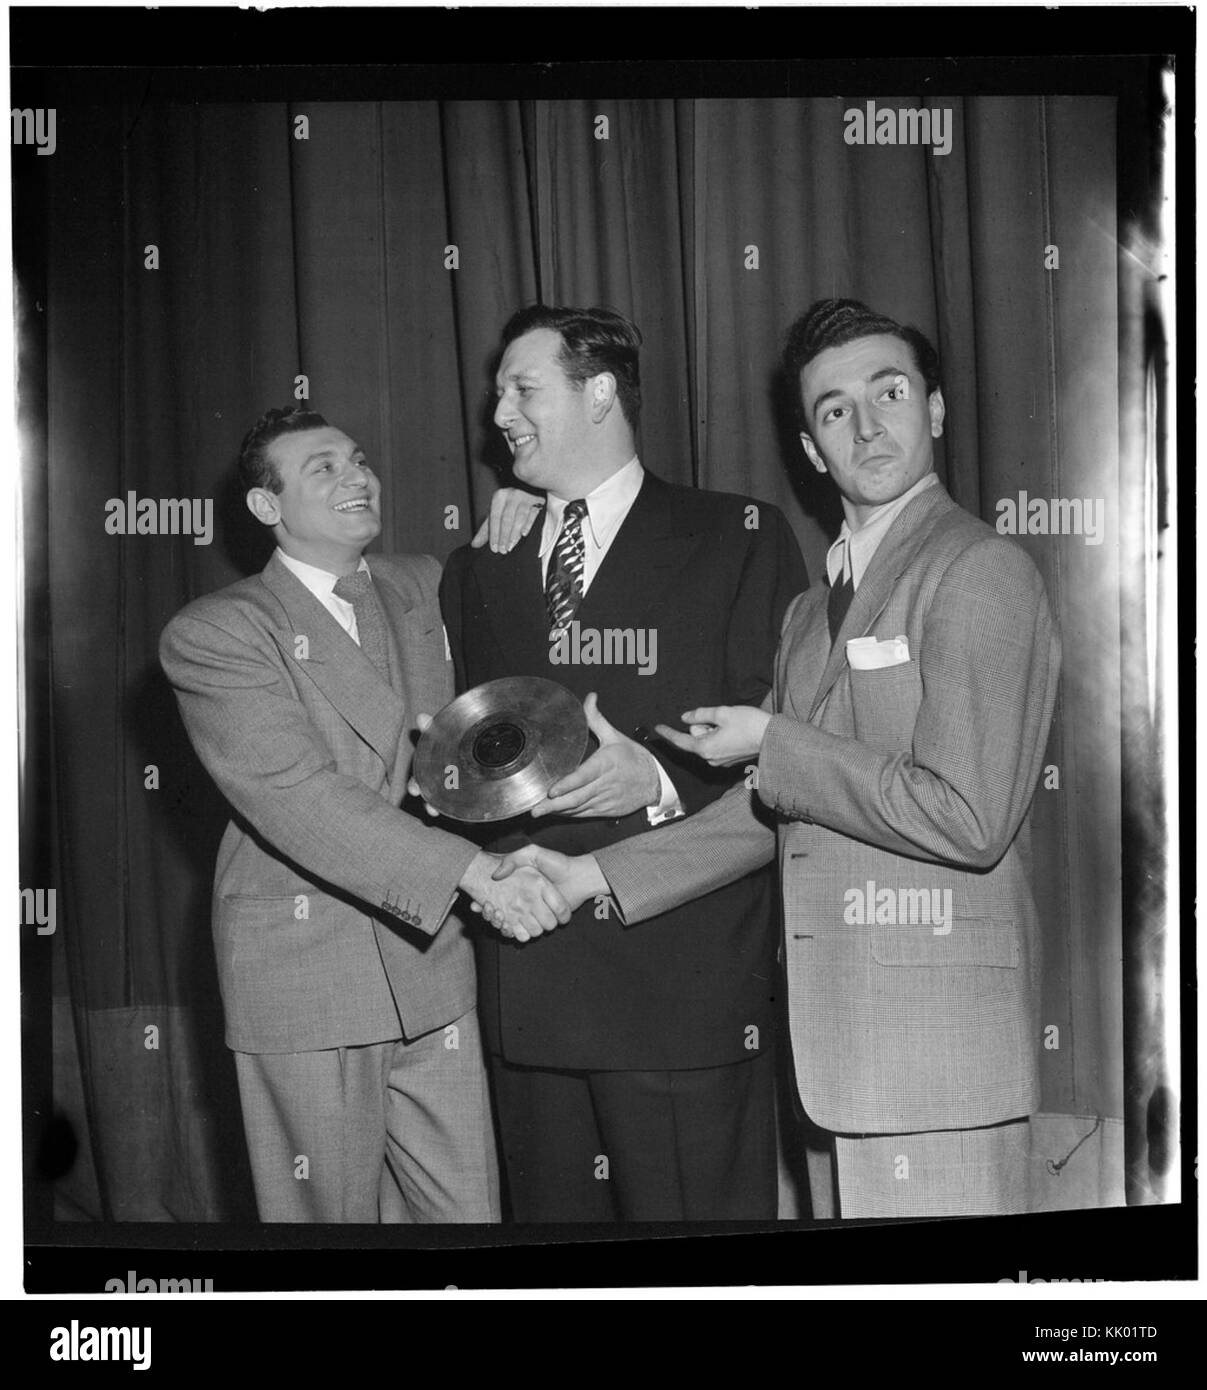 (Portrait of Frankie Laine and Vic Damone, New York, N.Y., between 1946 and 1948) (LOC) (5395251301) Stock Photo